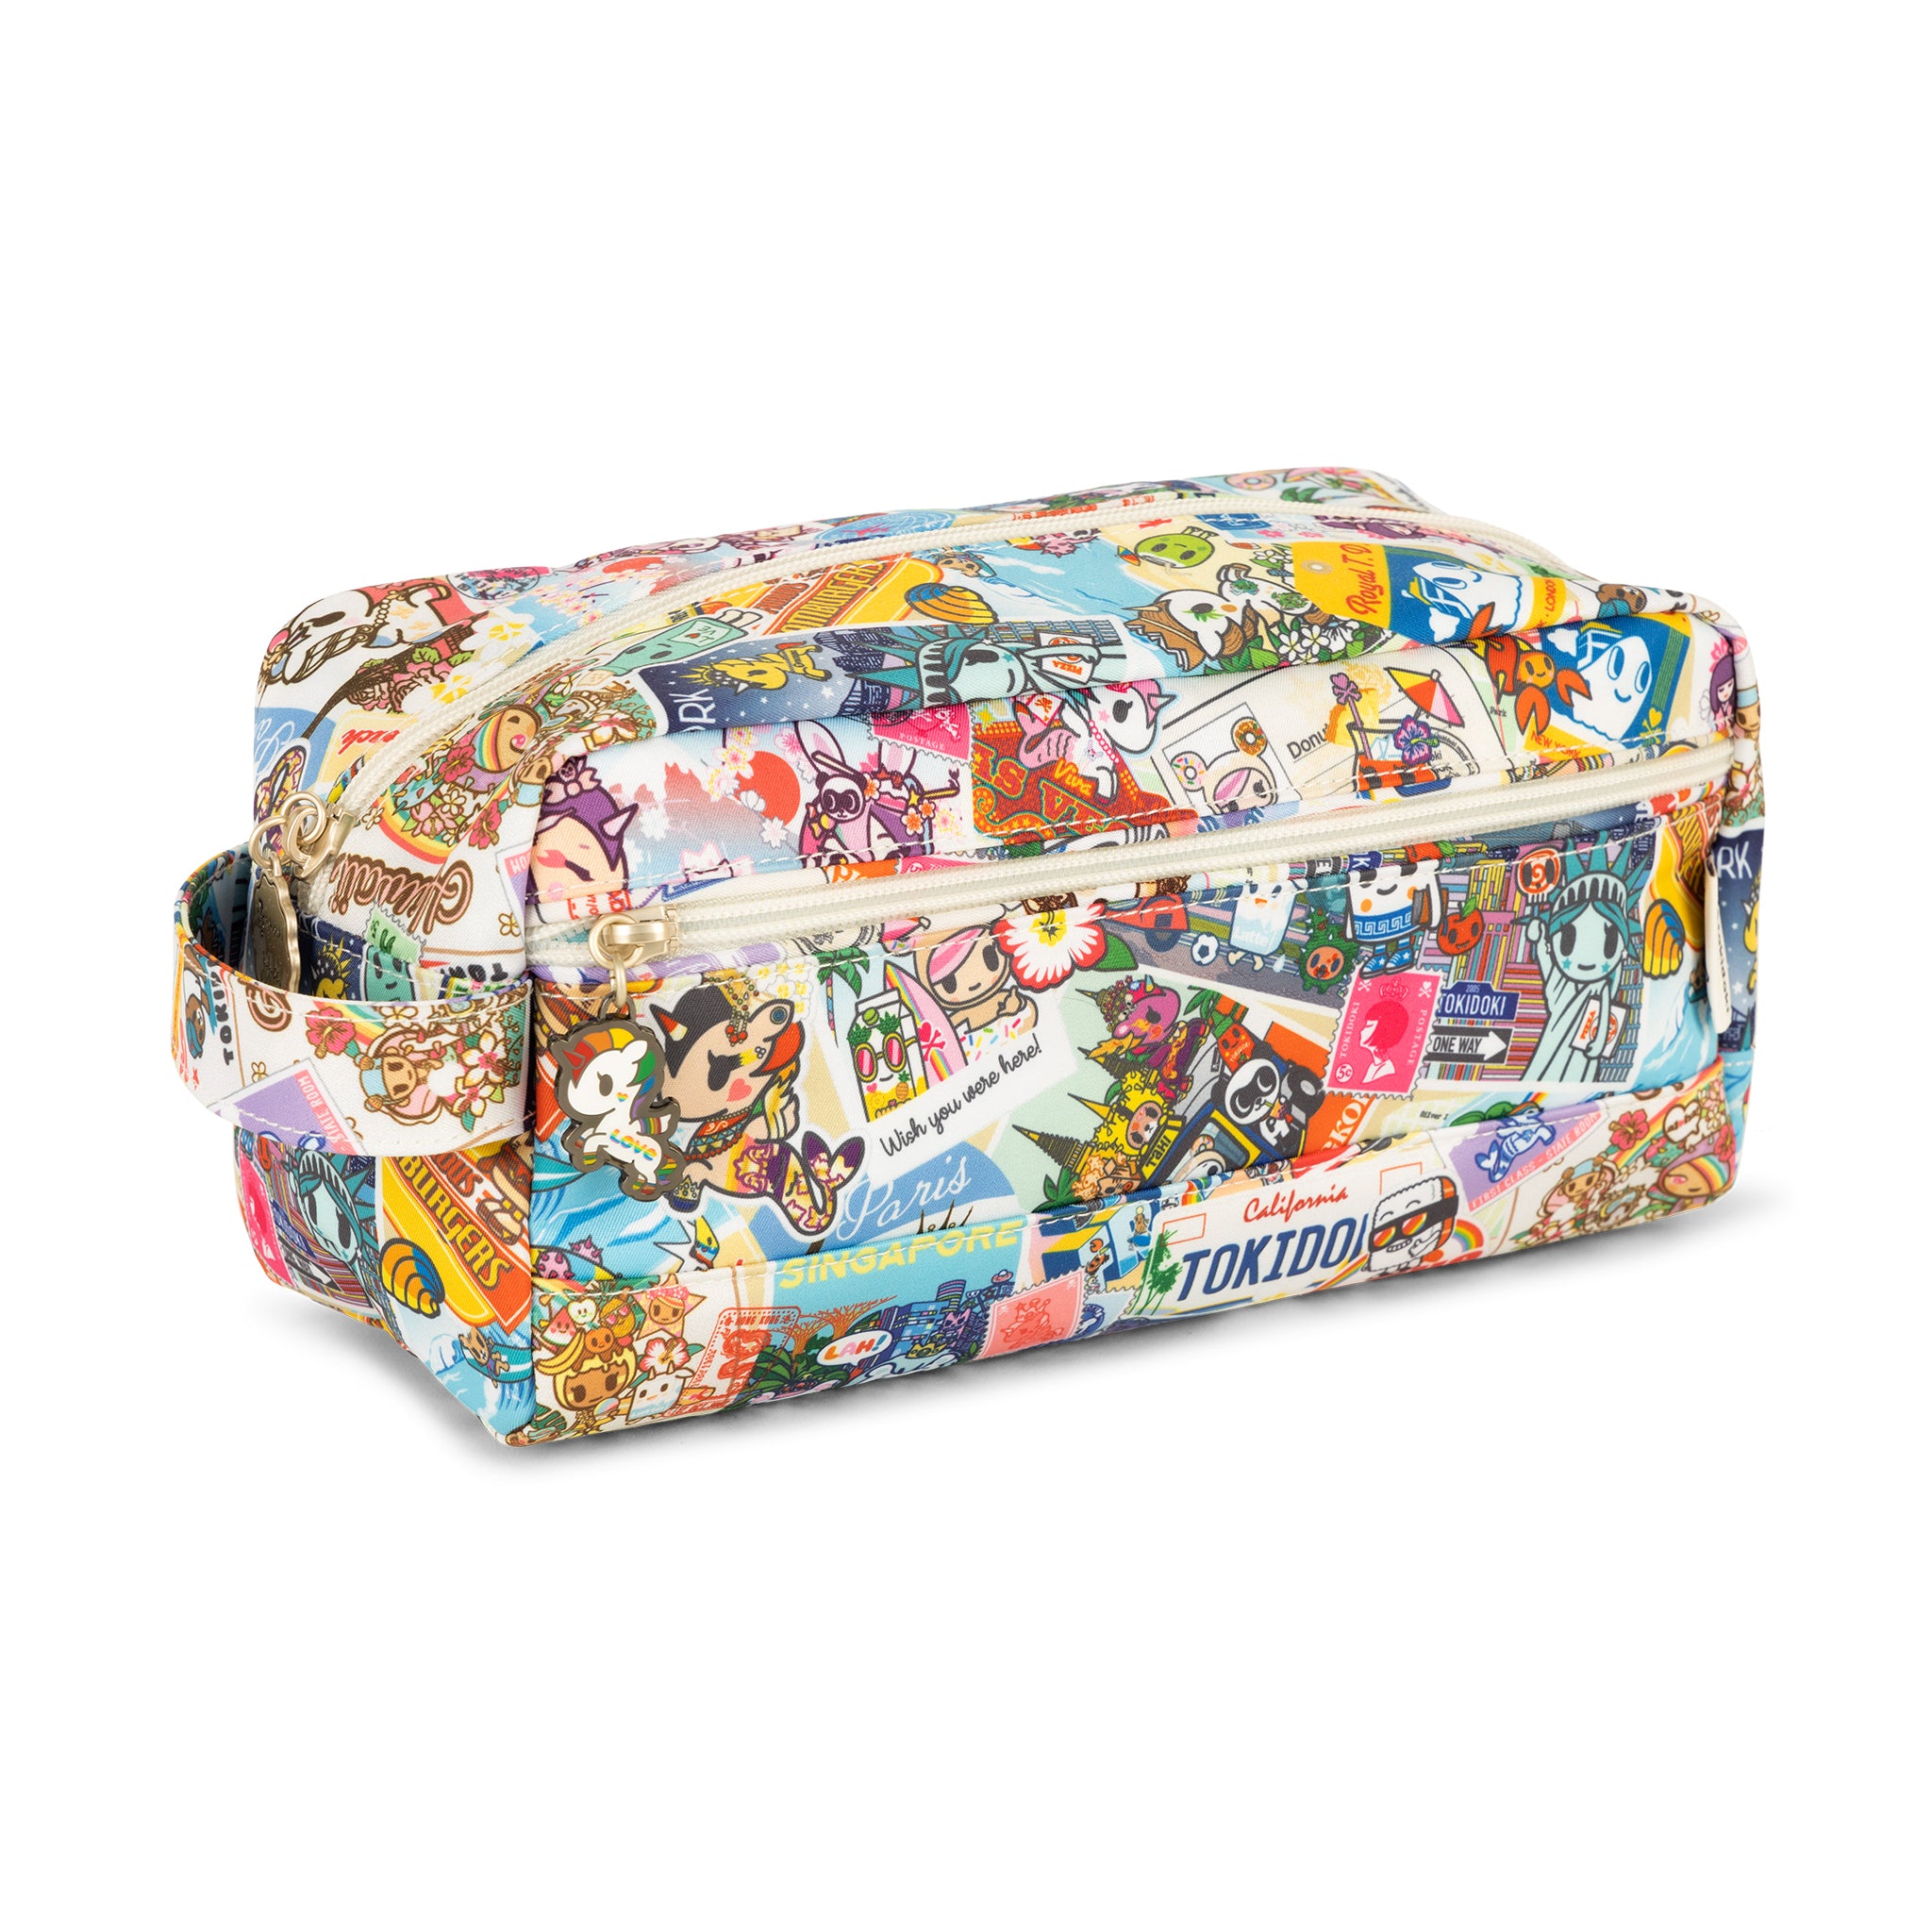 Multicolor Postcards with tokidoki characters traveling Be Dapper Toiletry Bag Quarter Angle View